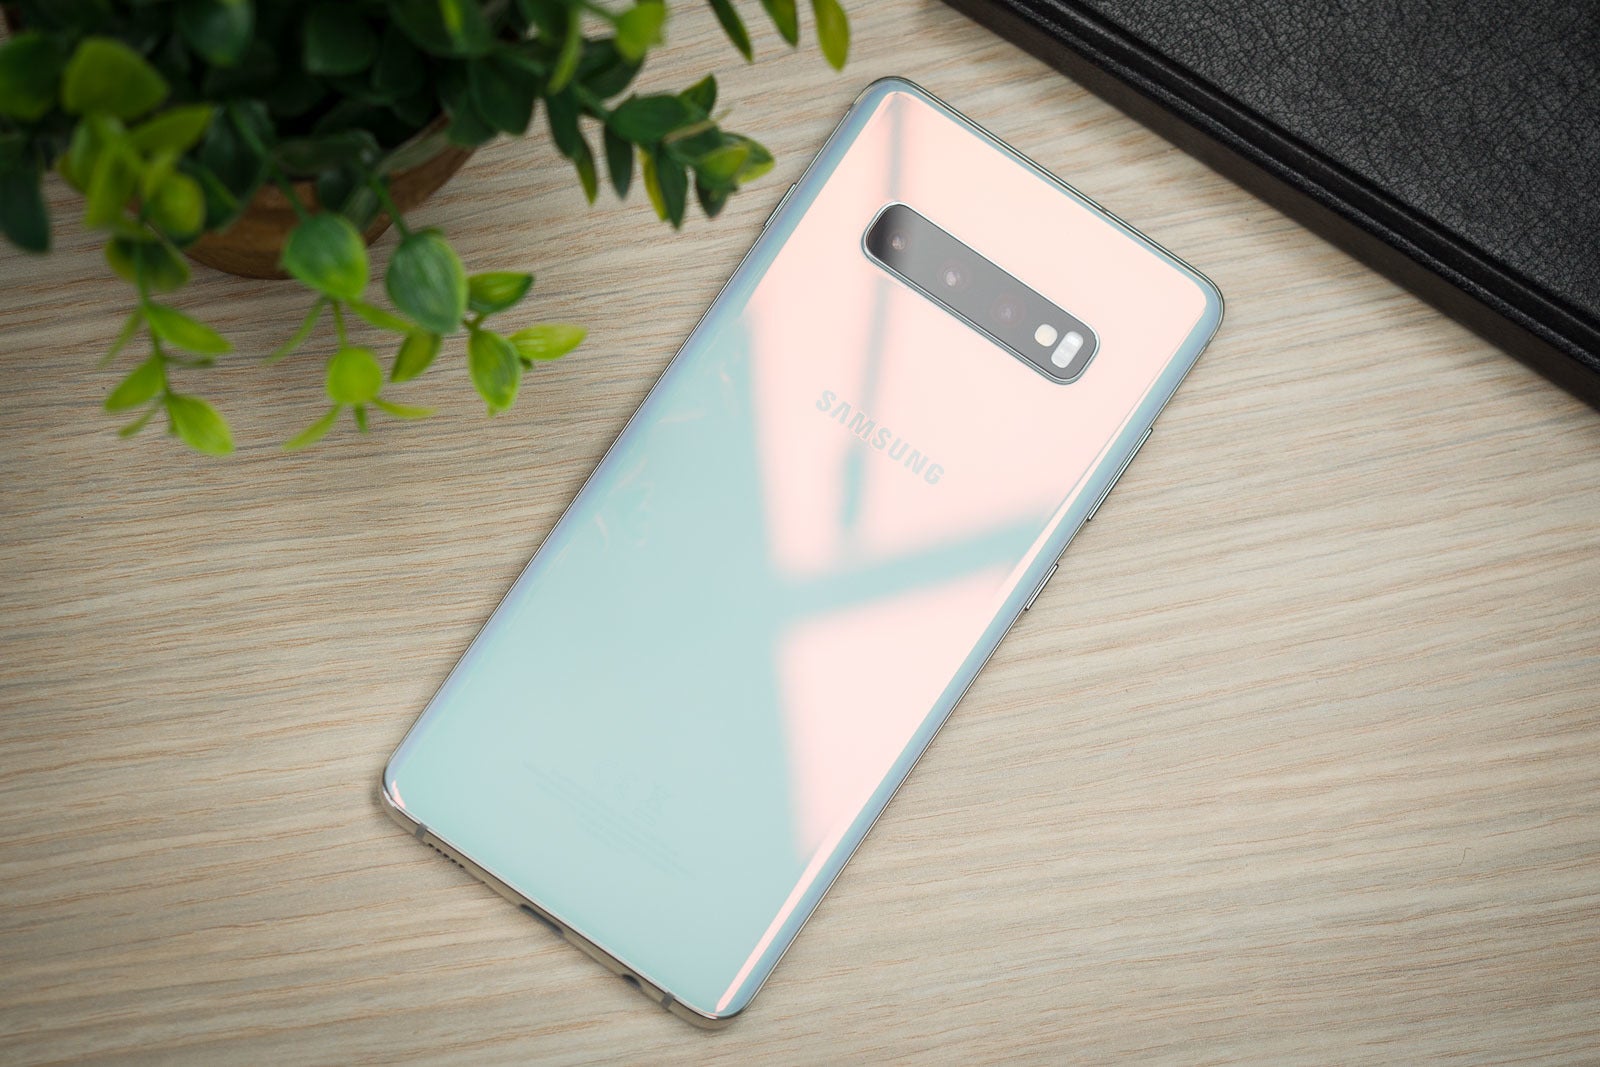 Samsung Galaxy S10 and S10+ review: 10 key takeaways